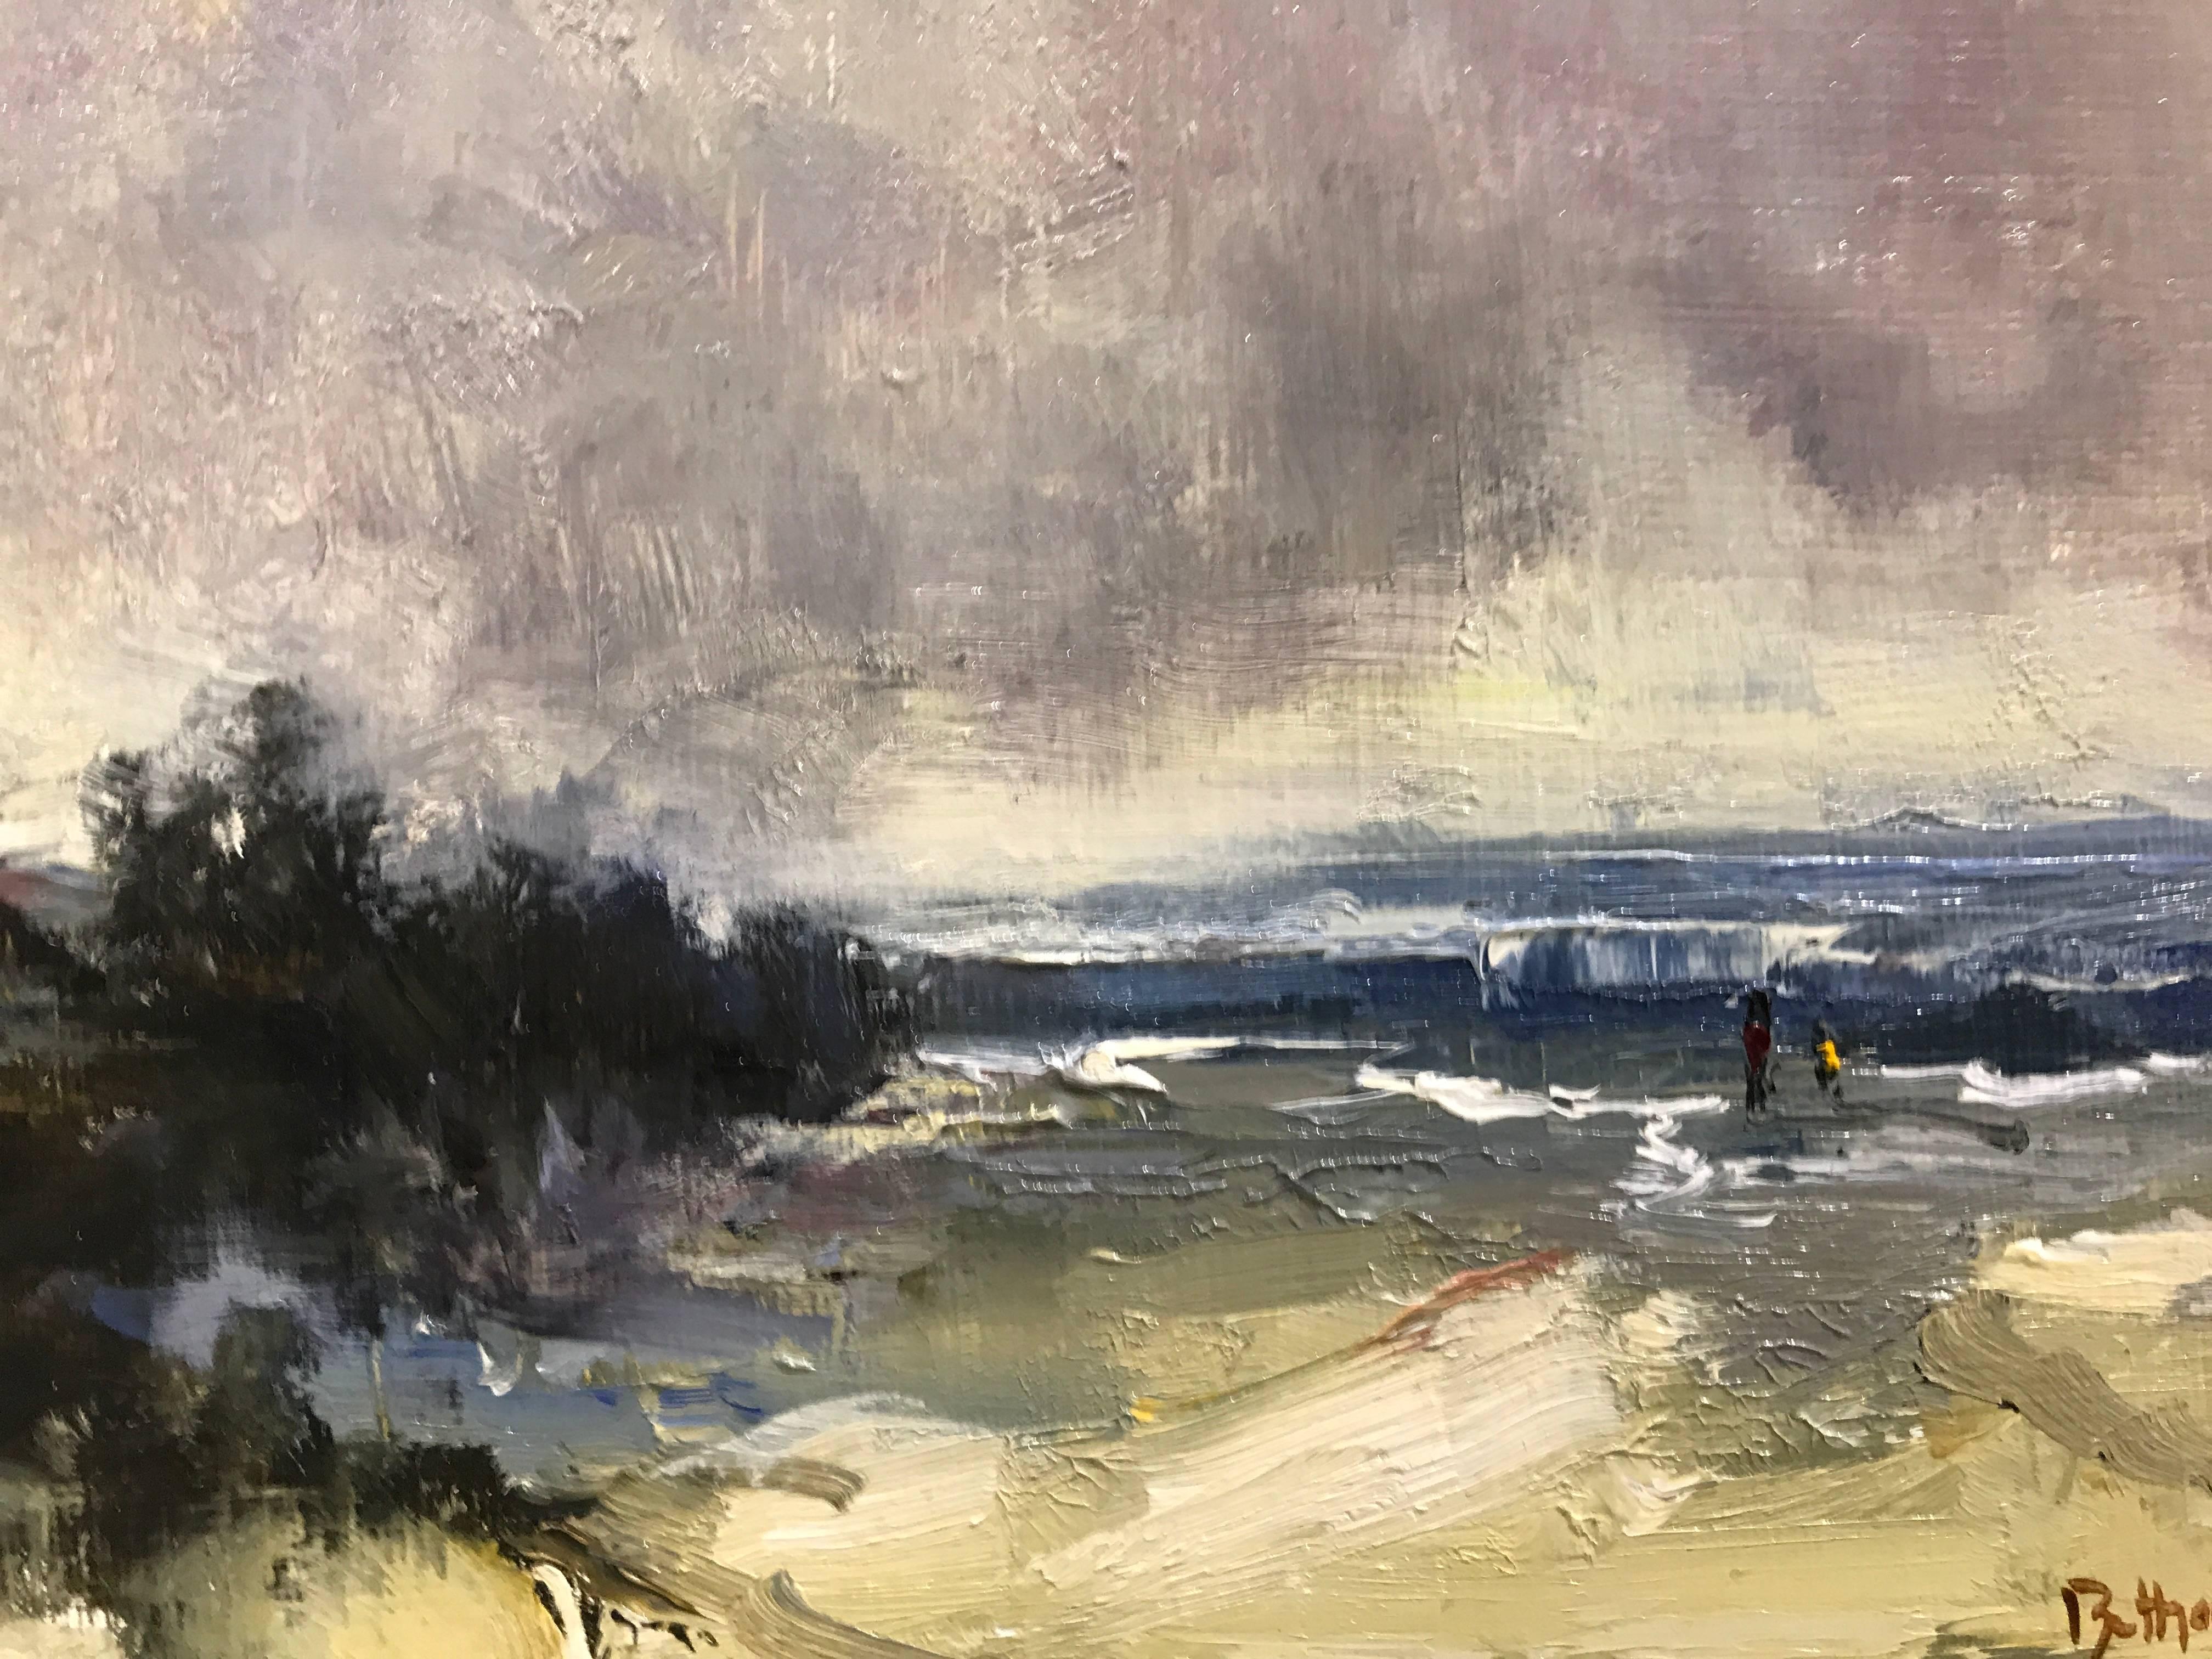 'As I Gaze Upon the Sea' Oil on Board, Impressionist, Beach Landscape Painting 1